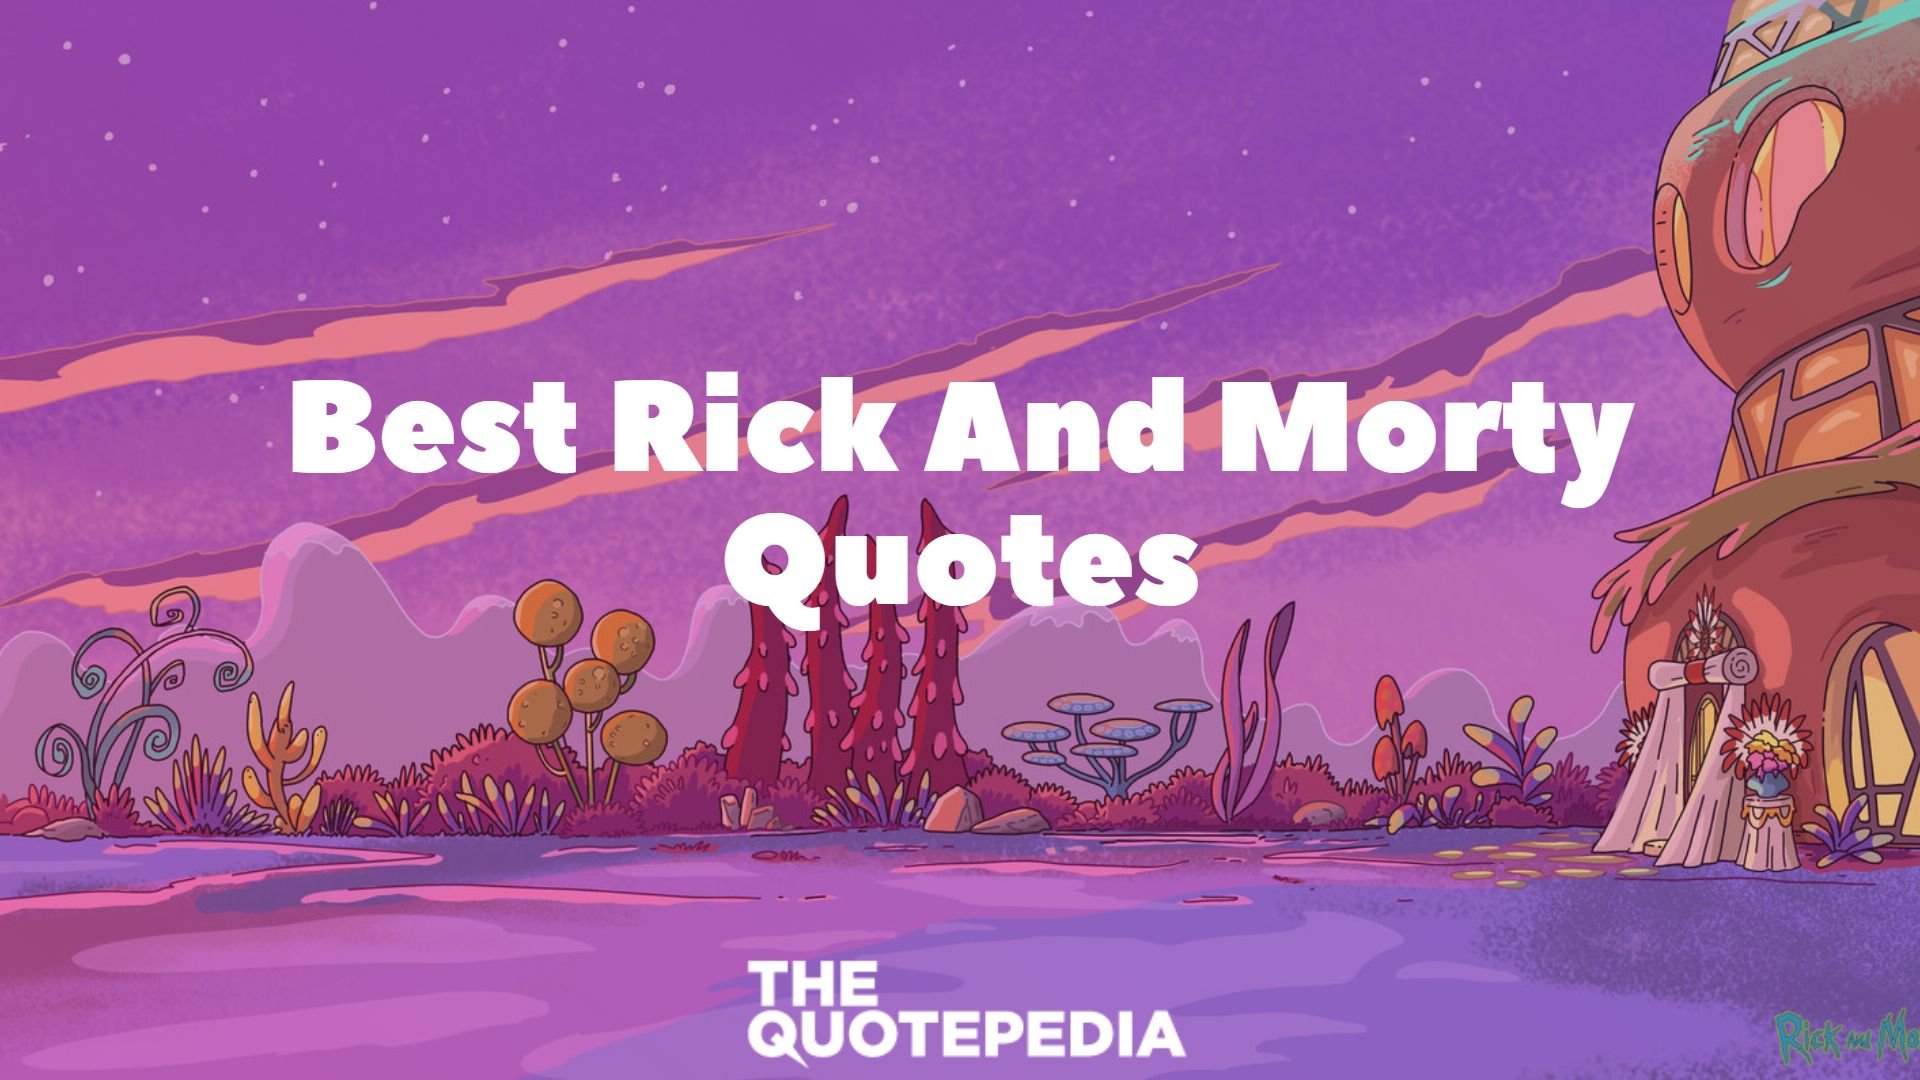 Best Rick And Morty Quotes